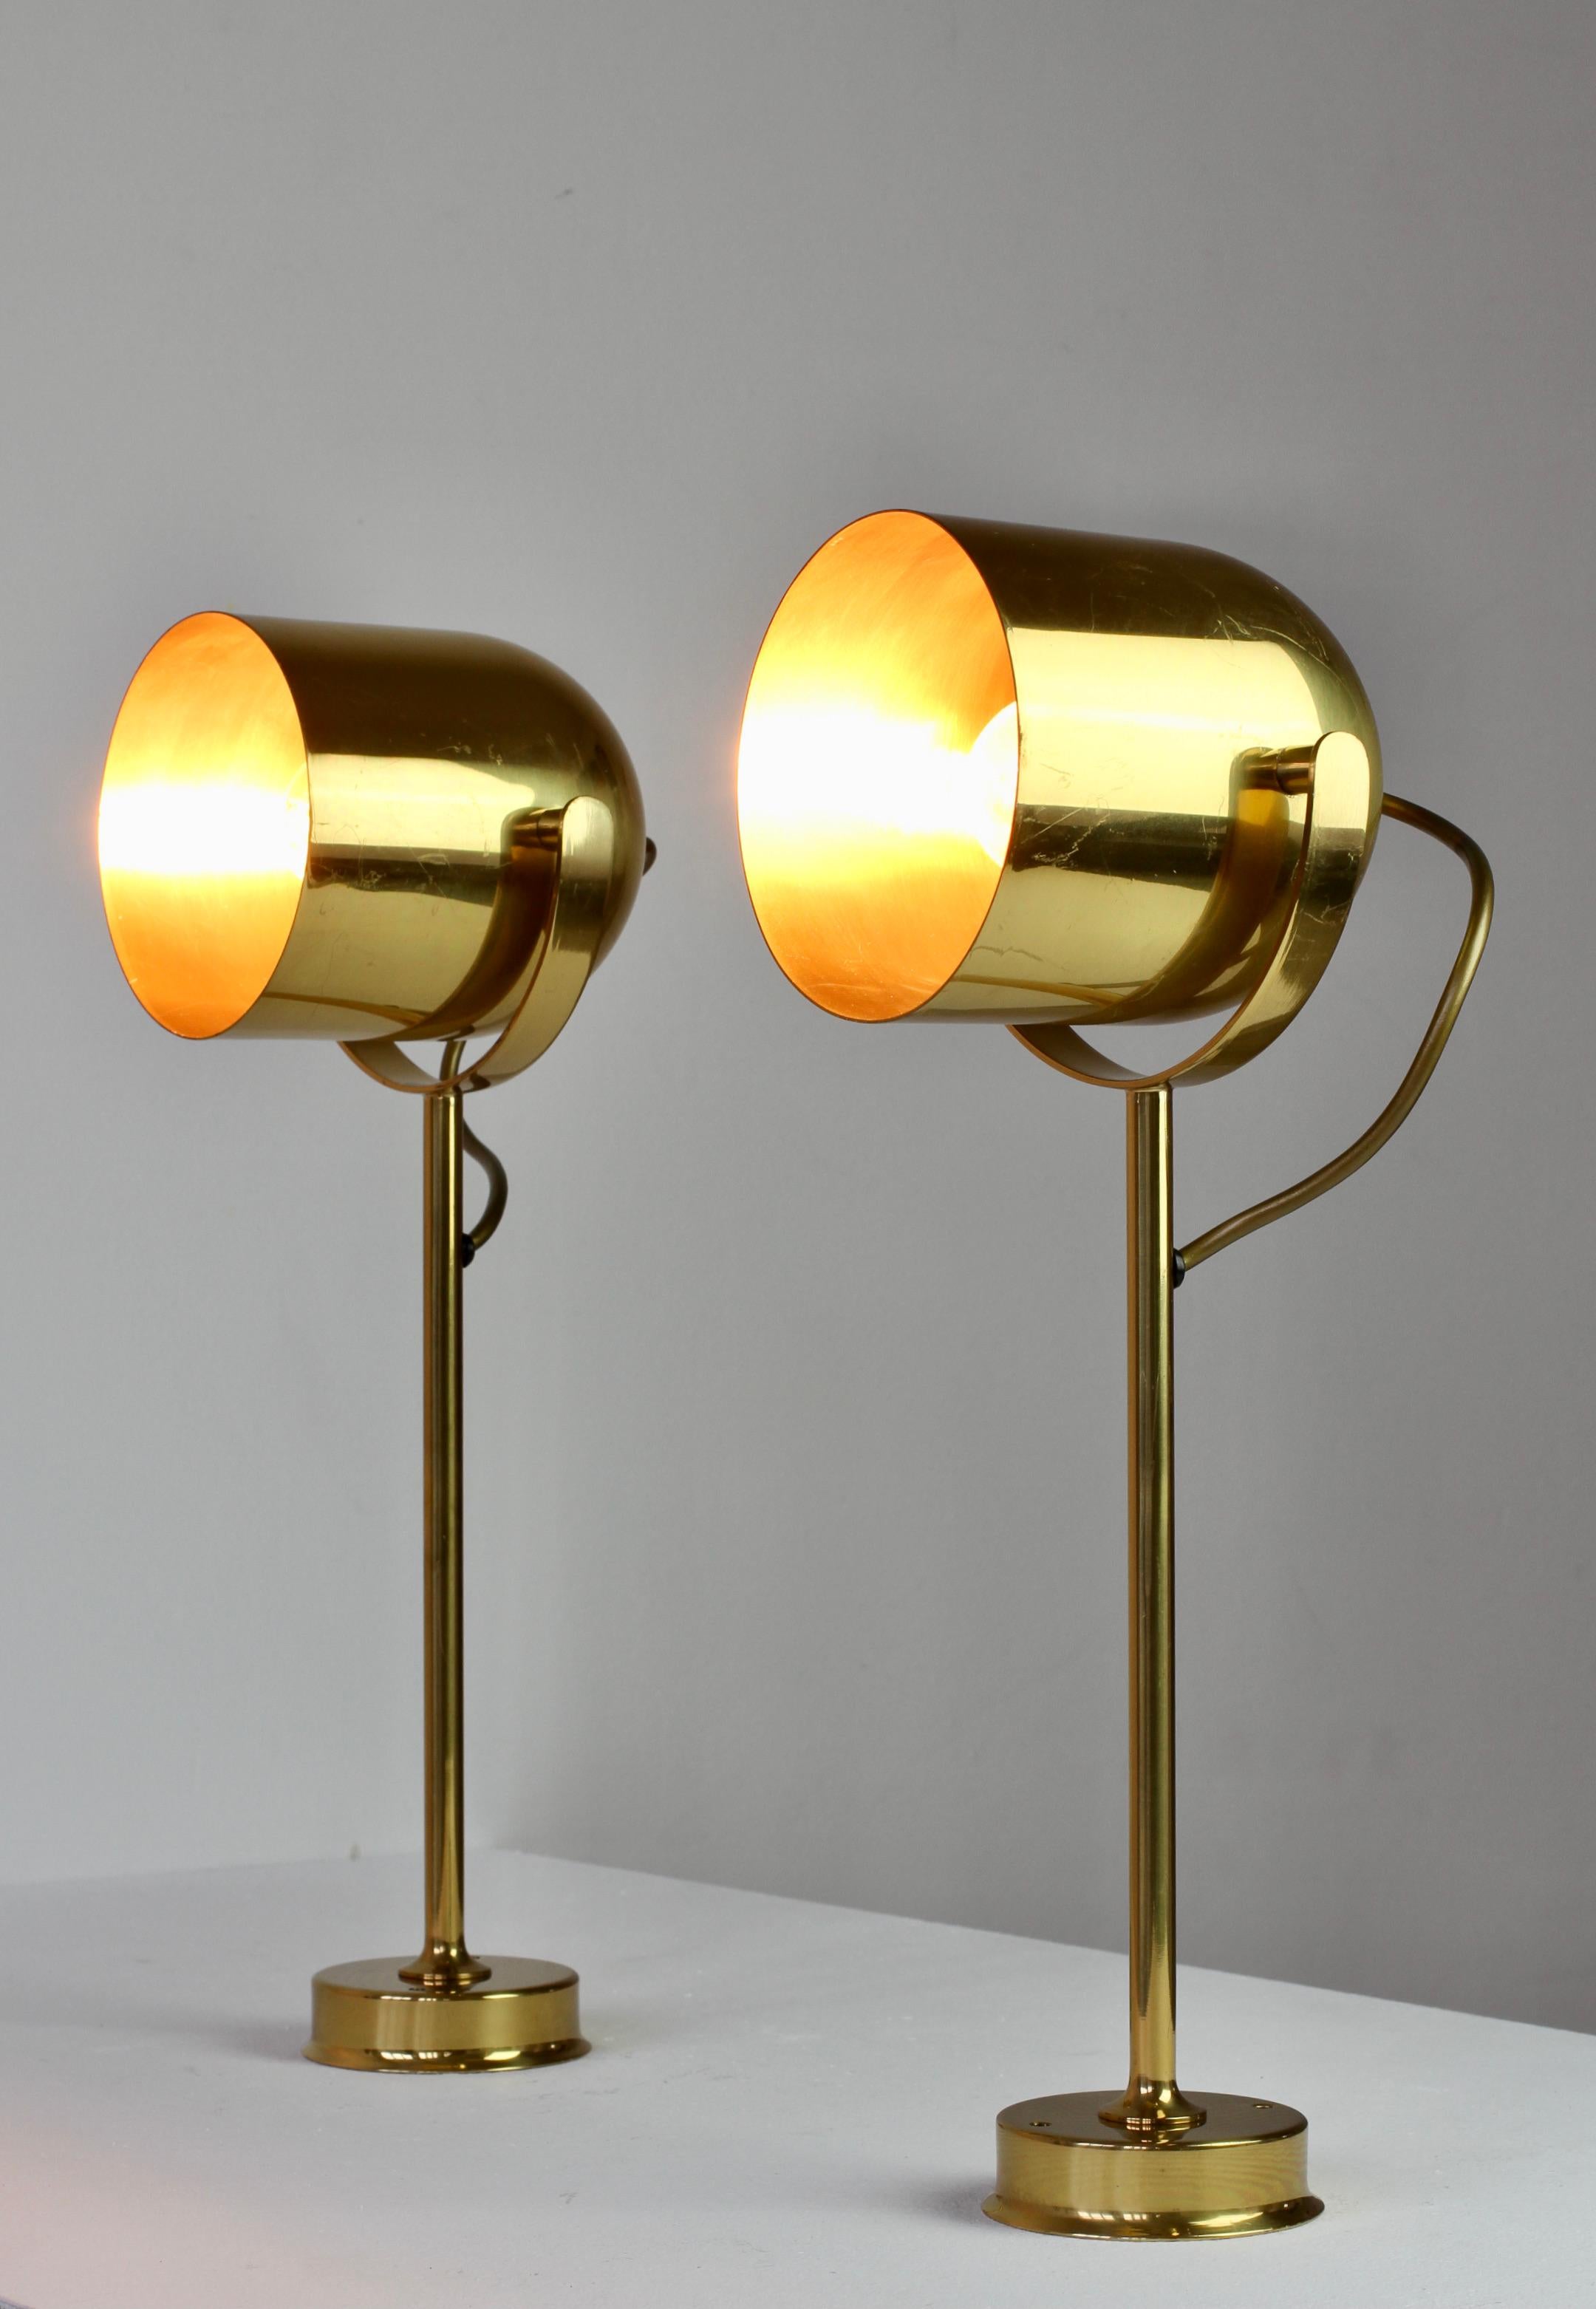 Polished Florian Schulz Vintage Mid-Century Brass 1970s Adjustable Reading Wall Lights For Sale